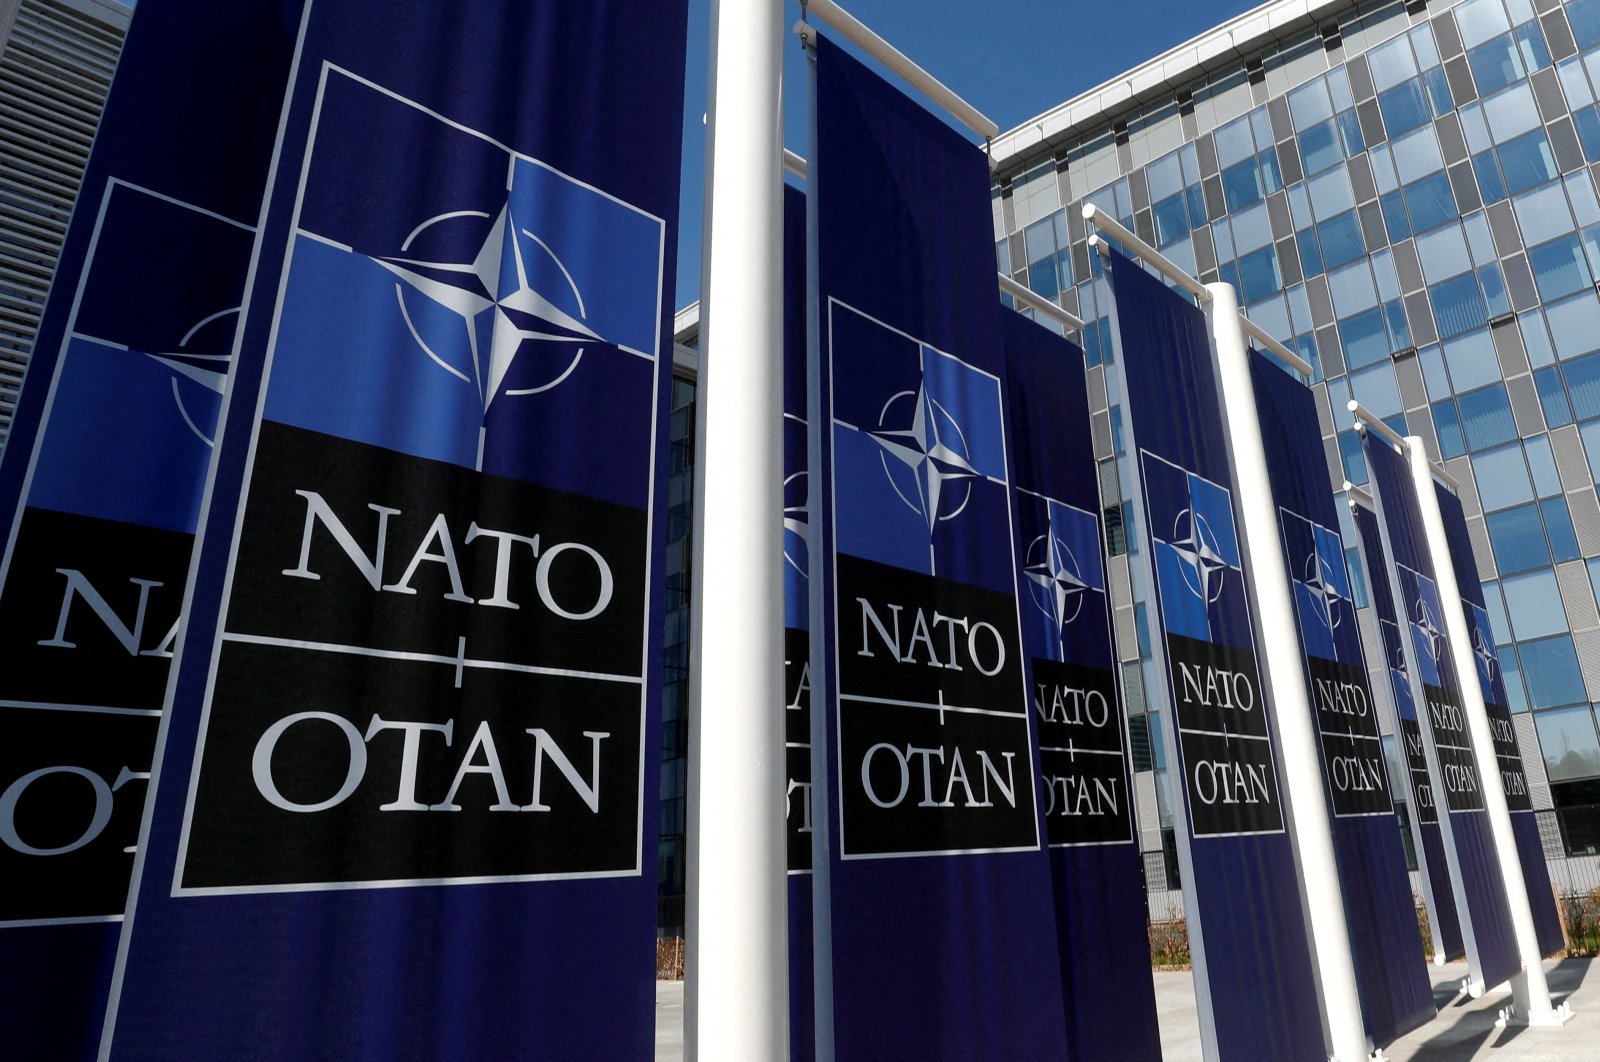 Banners displaying the NATO logo are placed at the entrance of the new NATO headquarters during the move to the new building, in Brussels, Belgium April 19, 2018. (Reuters File Photo)